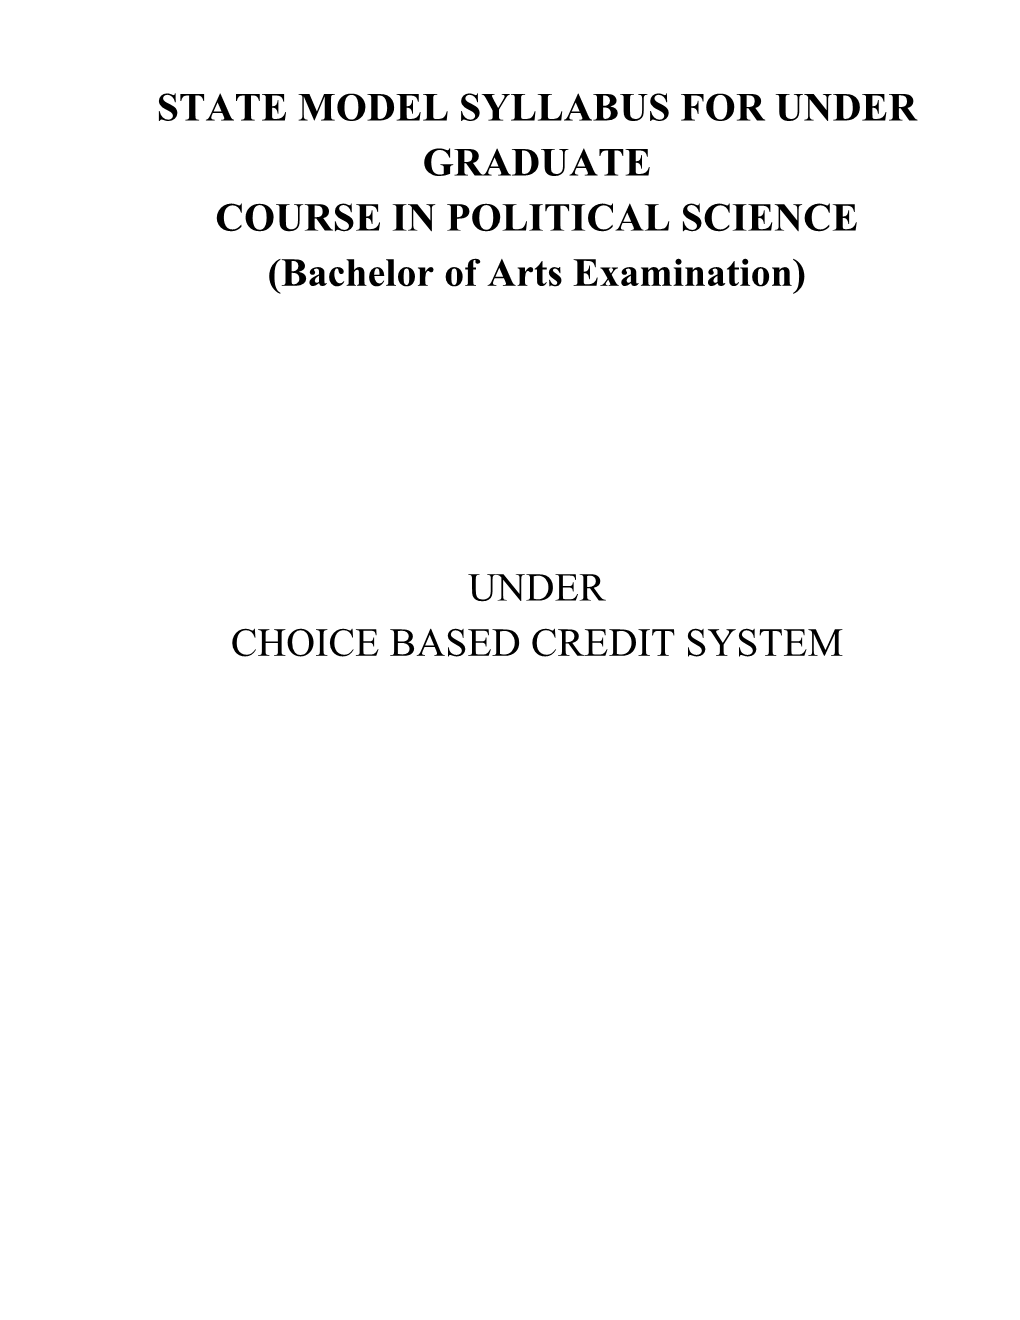 STATE MODEL SYLLABUS for UNDER GRADUATE COURSE in POLITICAL SCIENCE (Bachelor of Arts Examination)